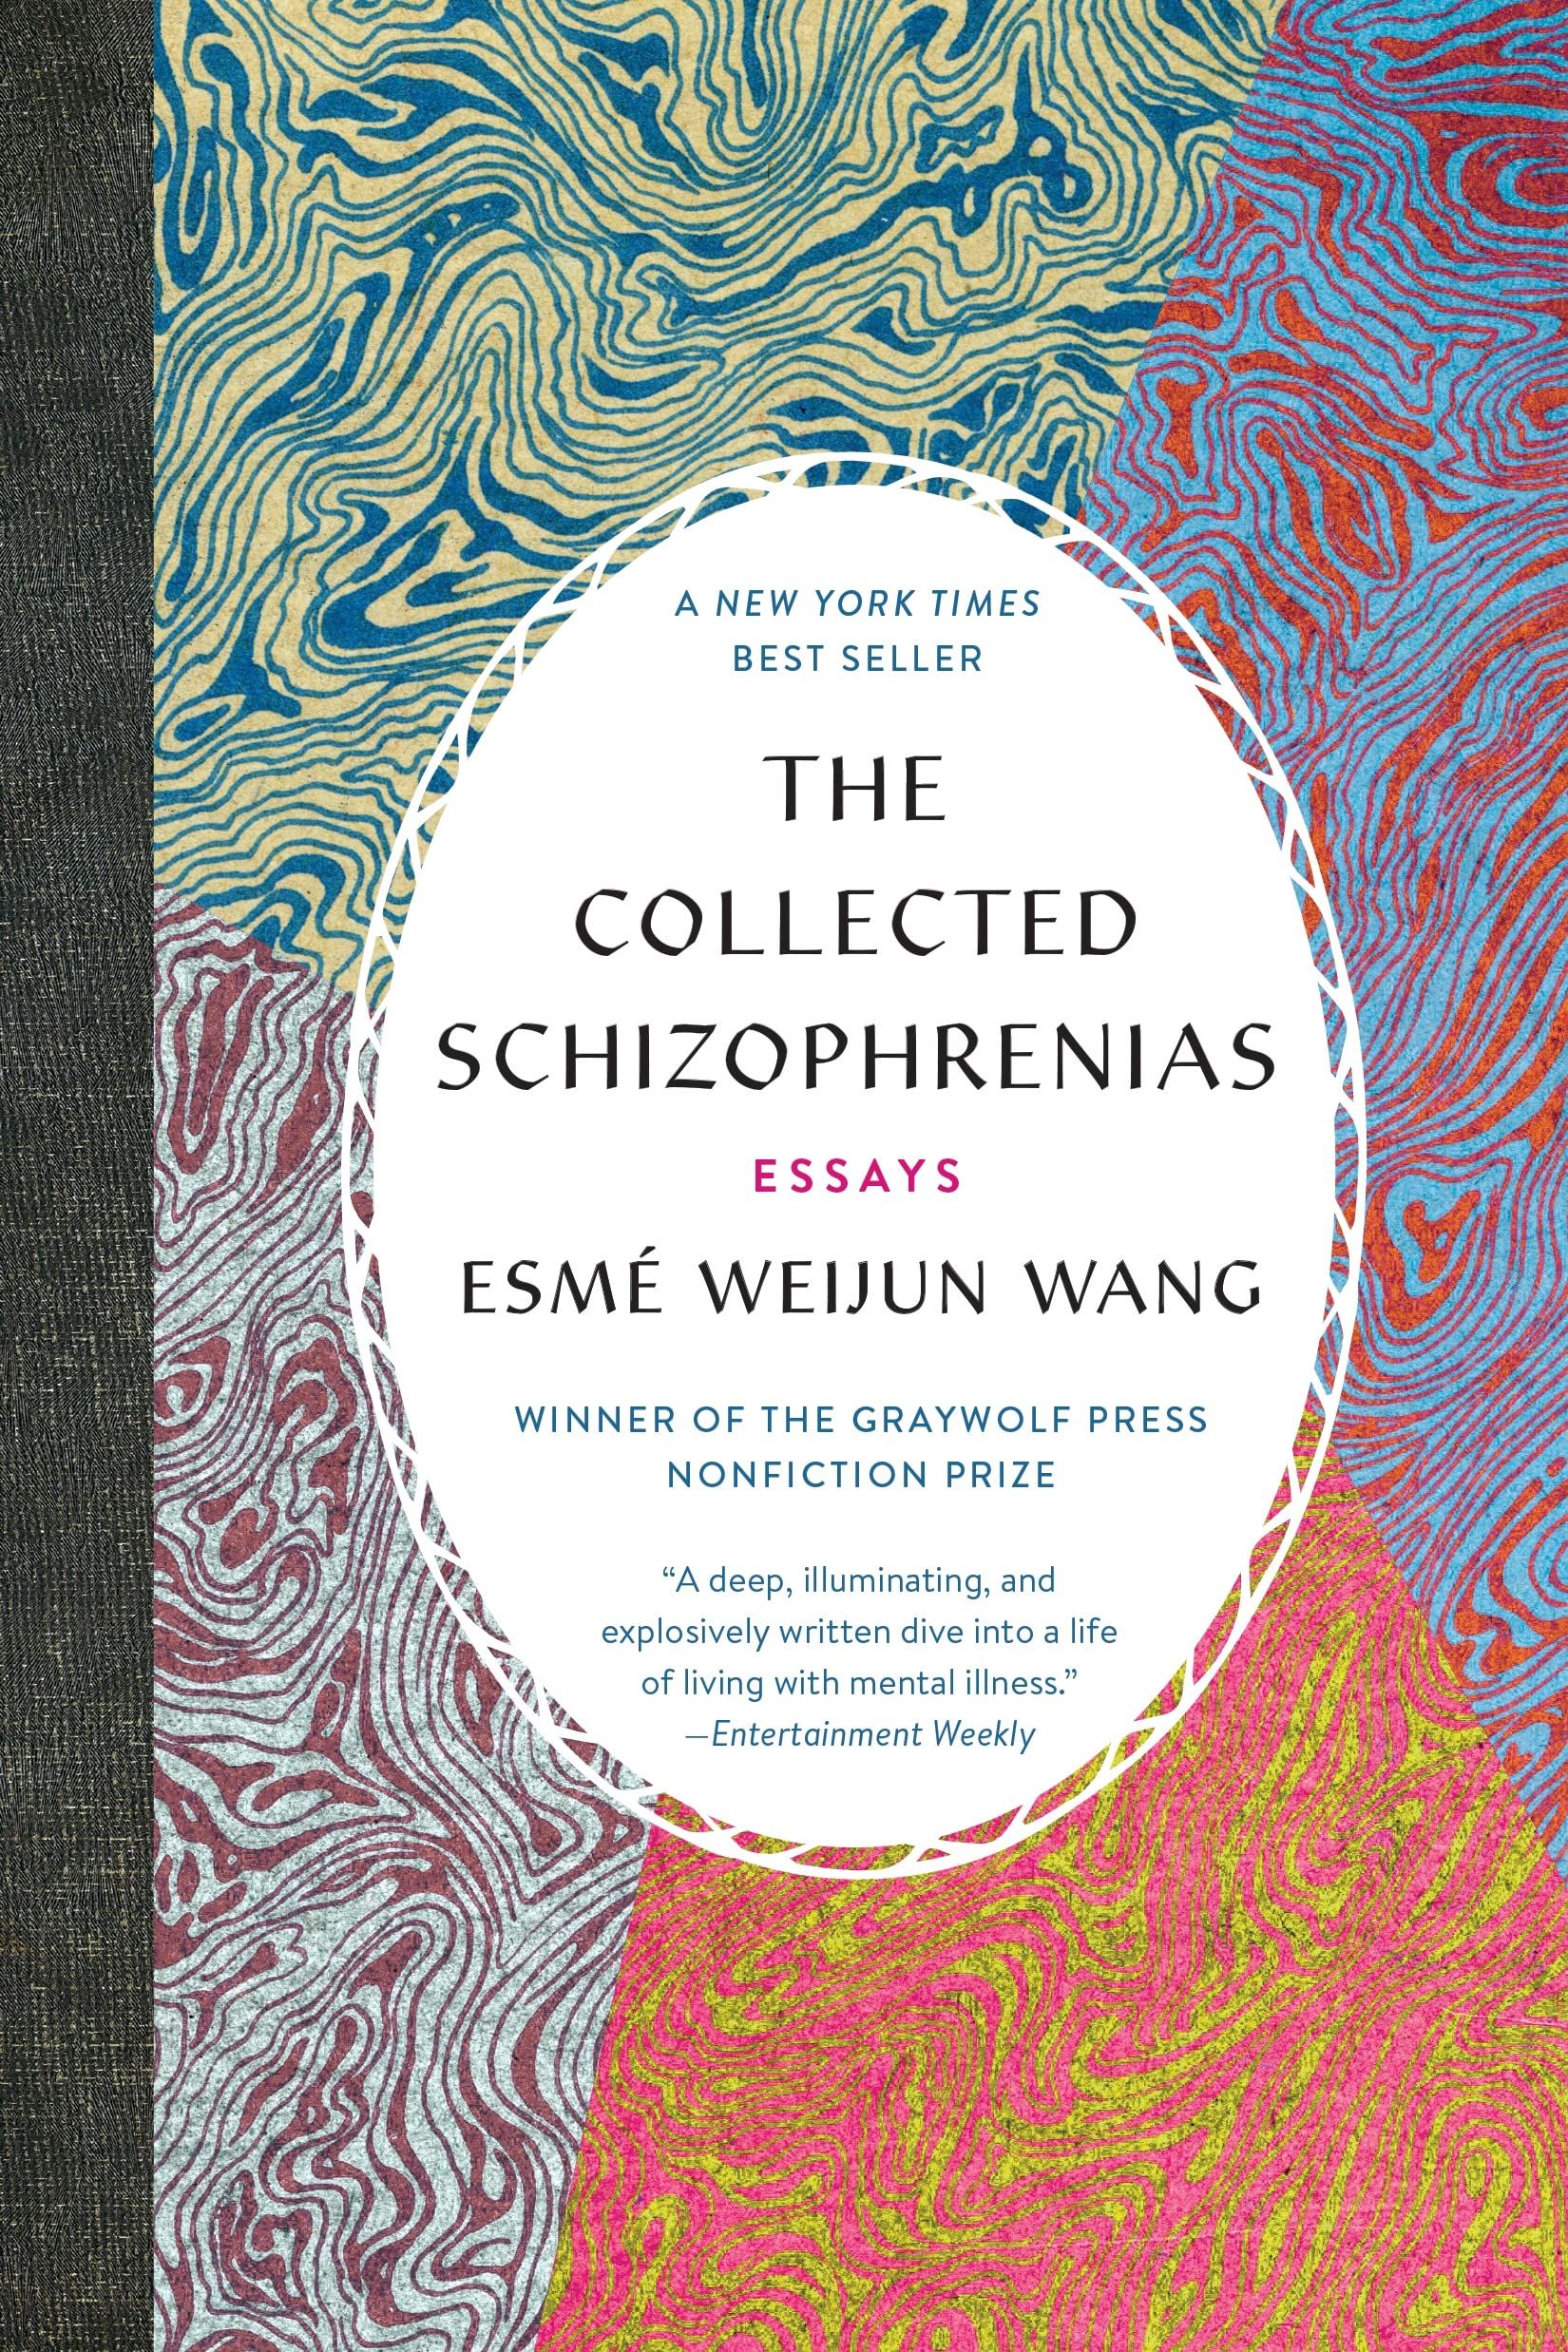 The Collected Schizophrenias by Esme Weijun Wang cover